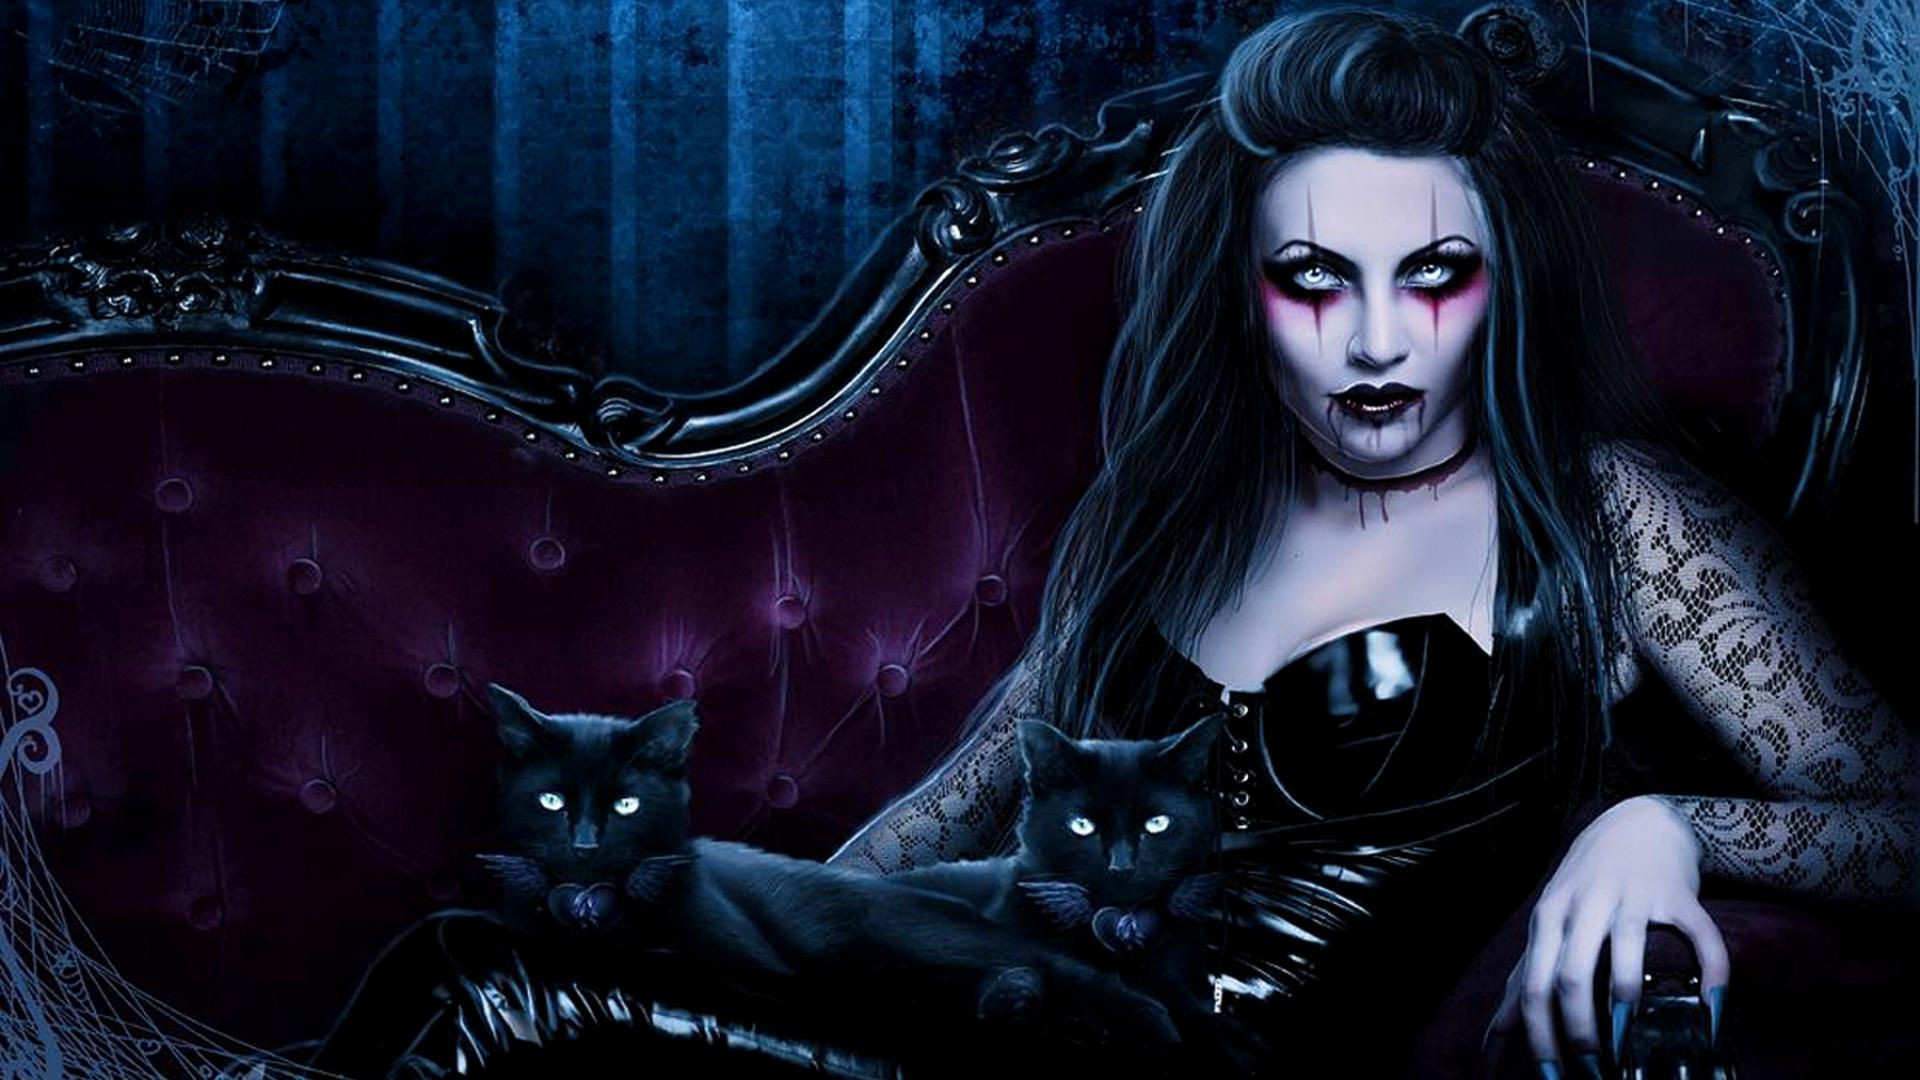 1920x1080 Gothic HD Wallpapers Backgrounds Wallpaper | HD Wallpapers | Pinterest |  Gothic art, Hd wallpaper and Gothic